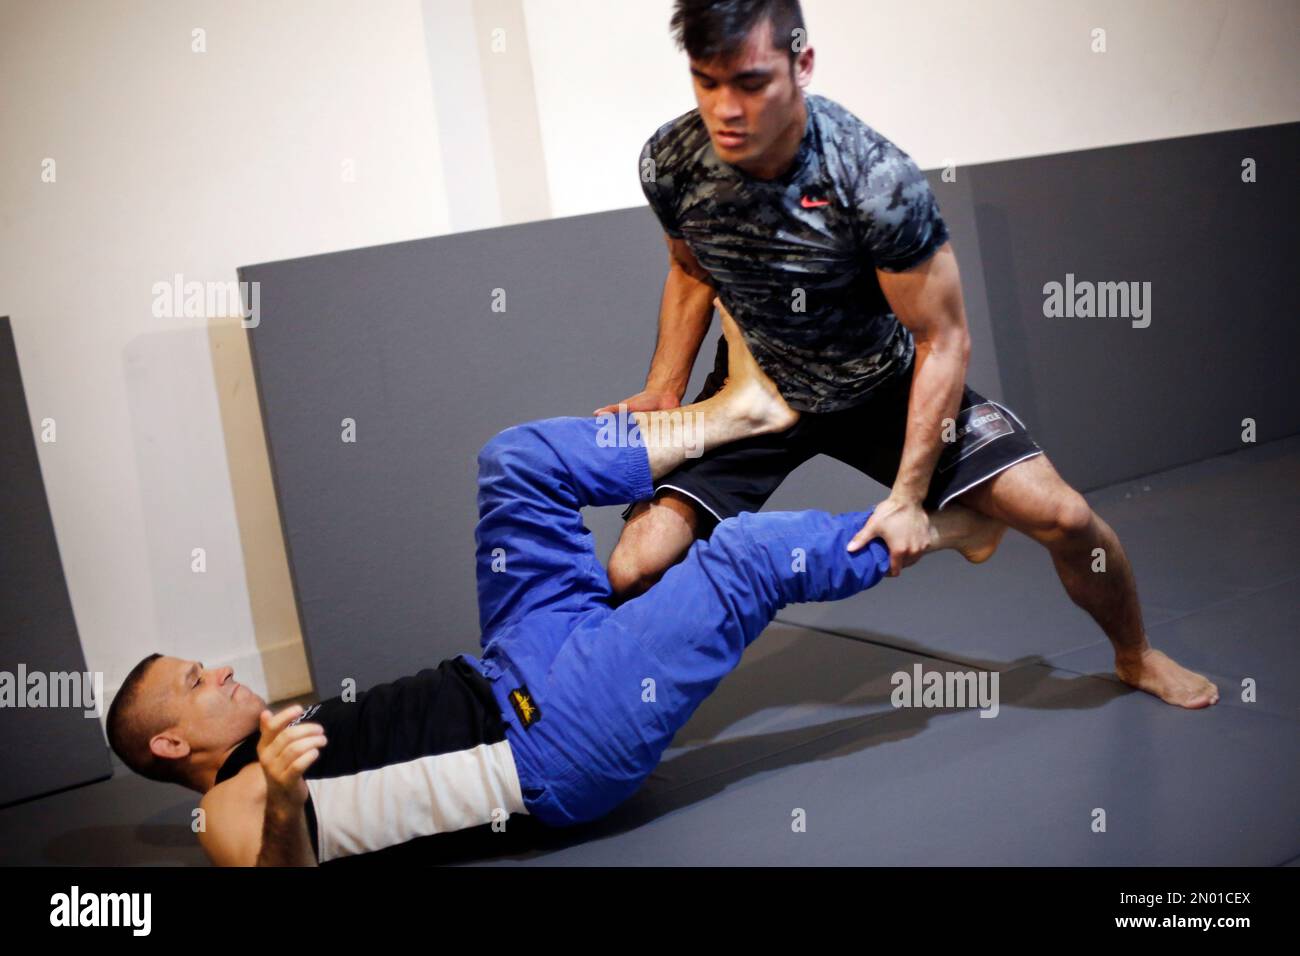 Rene Dreifuss, left, a mixed martial arts coach, trains Richard Callado at Radical  MMA NYC, a New York gym, Tuesday, March 22, 2016. New York is poised to end  its ban on